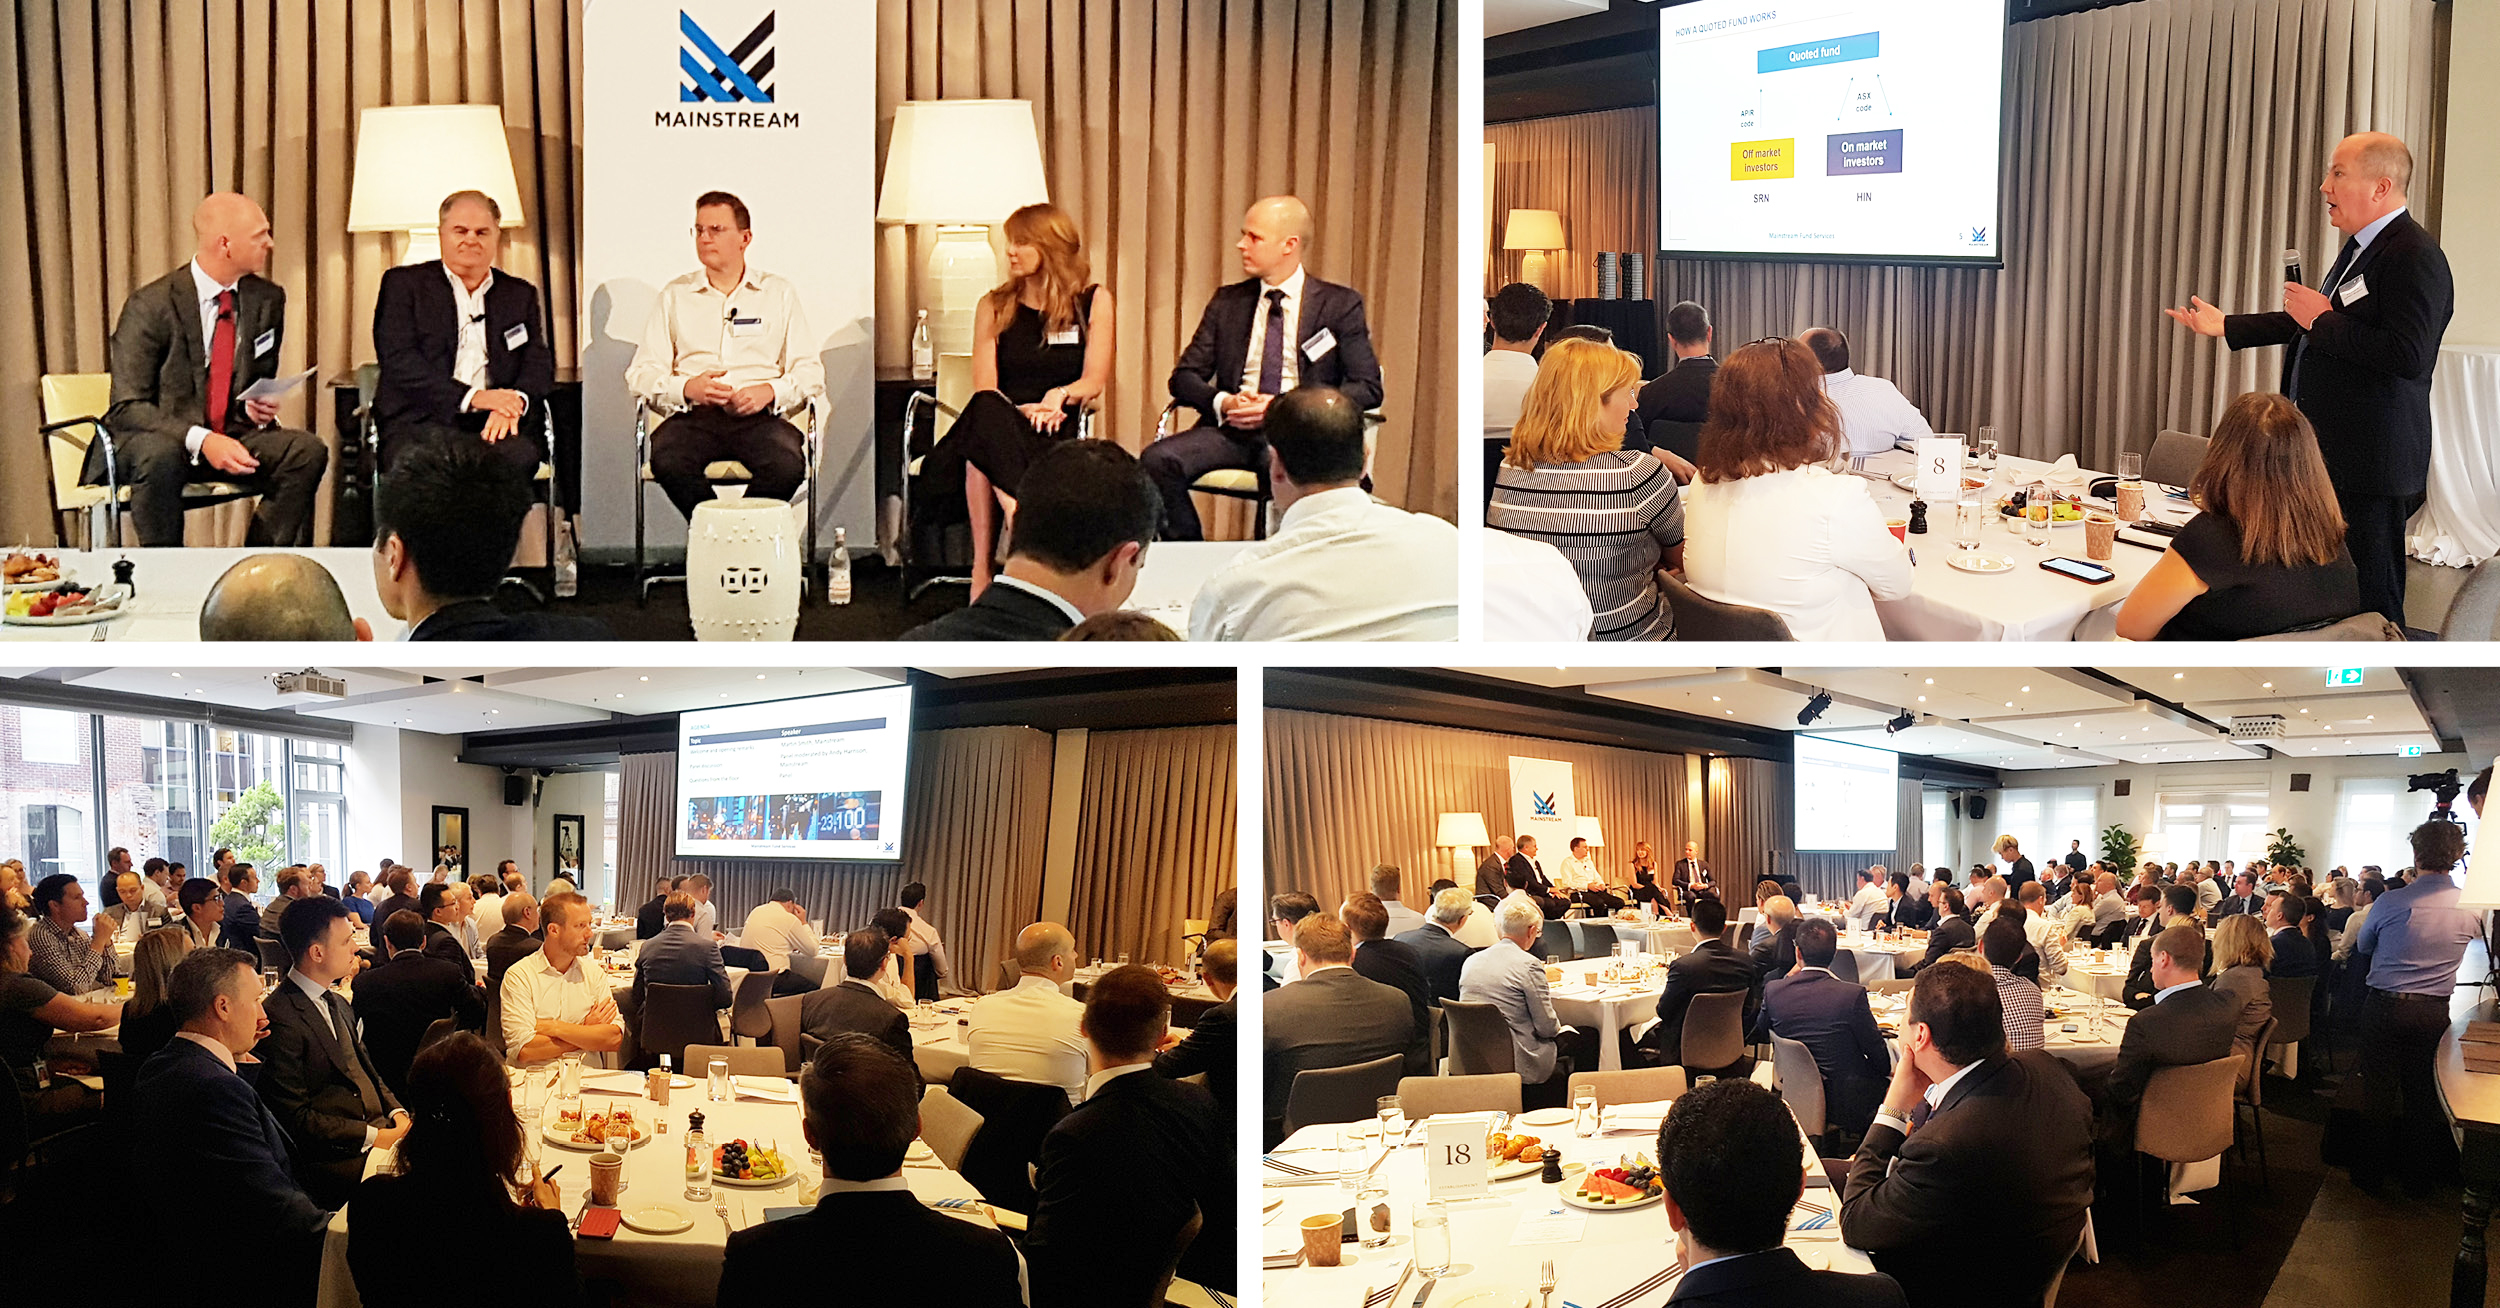 Mainstream Breakfast Session on the Convergence of Listed and Unlisted Funds